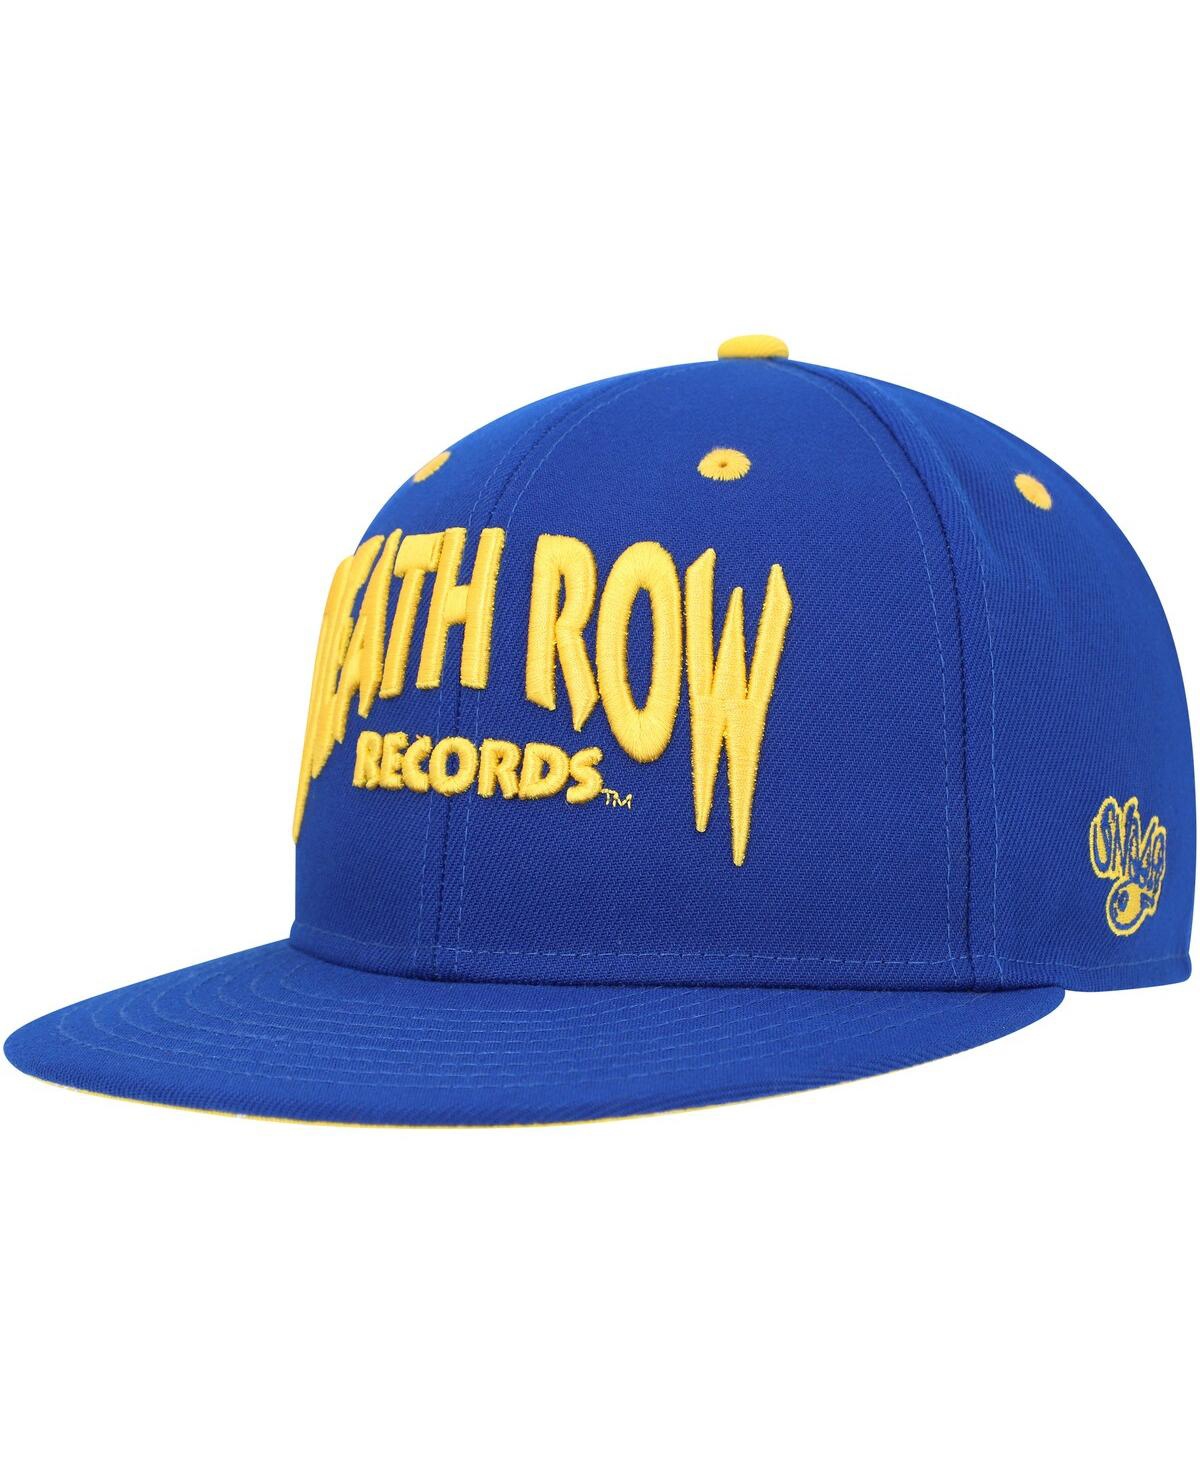 Men's Royal Death Row Records Paisley Fitted Hat - Royal